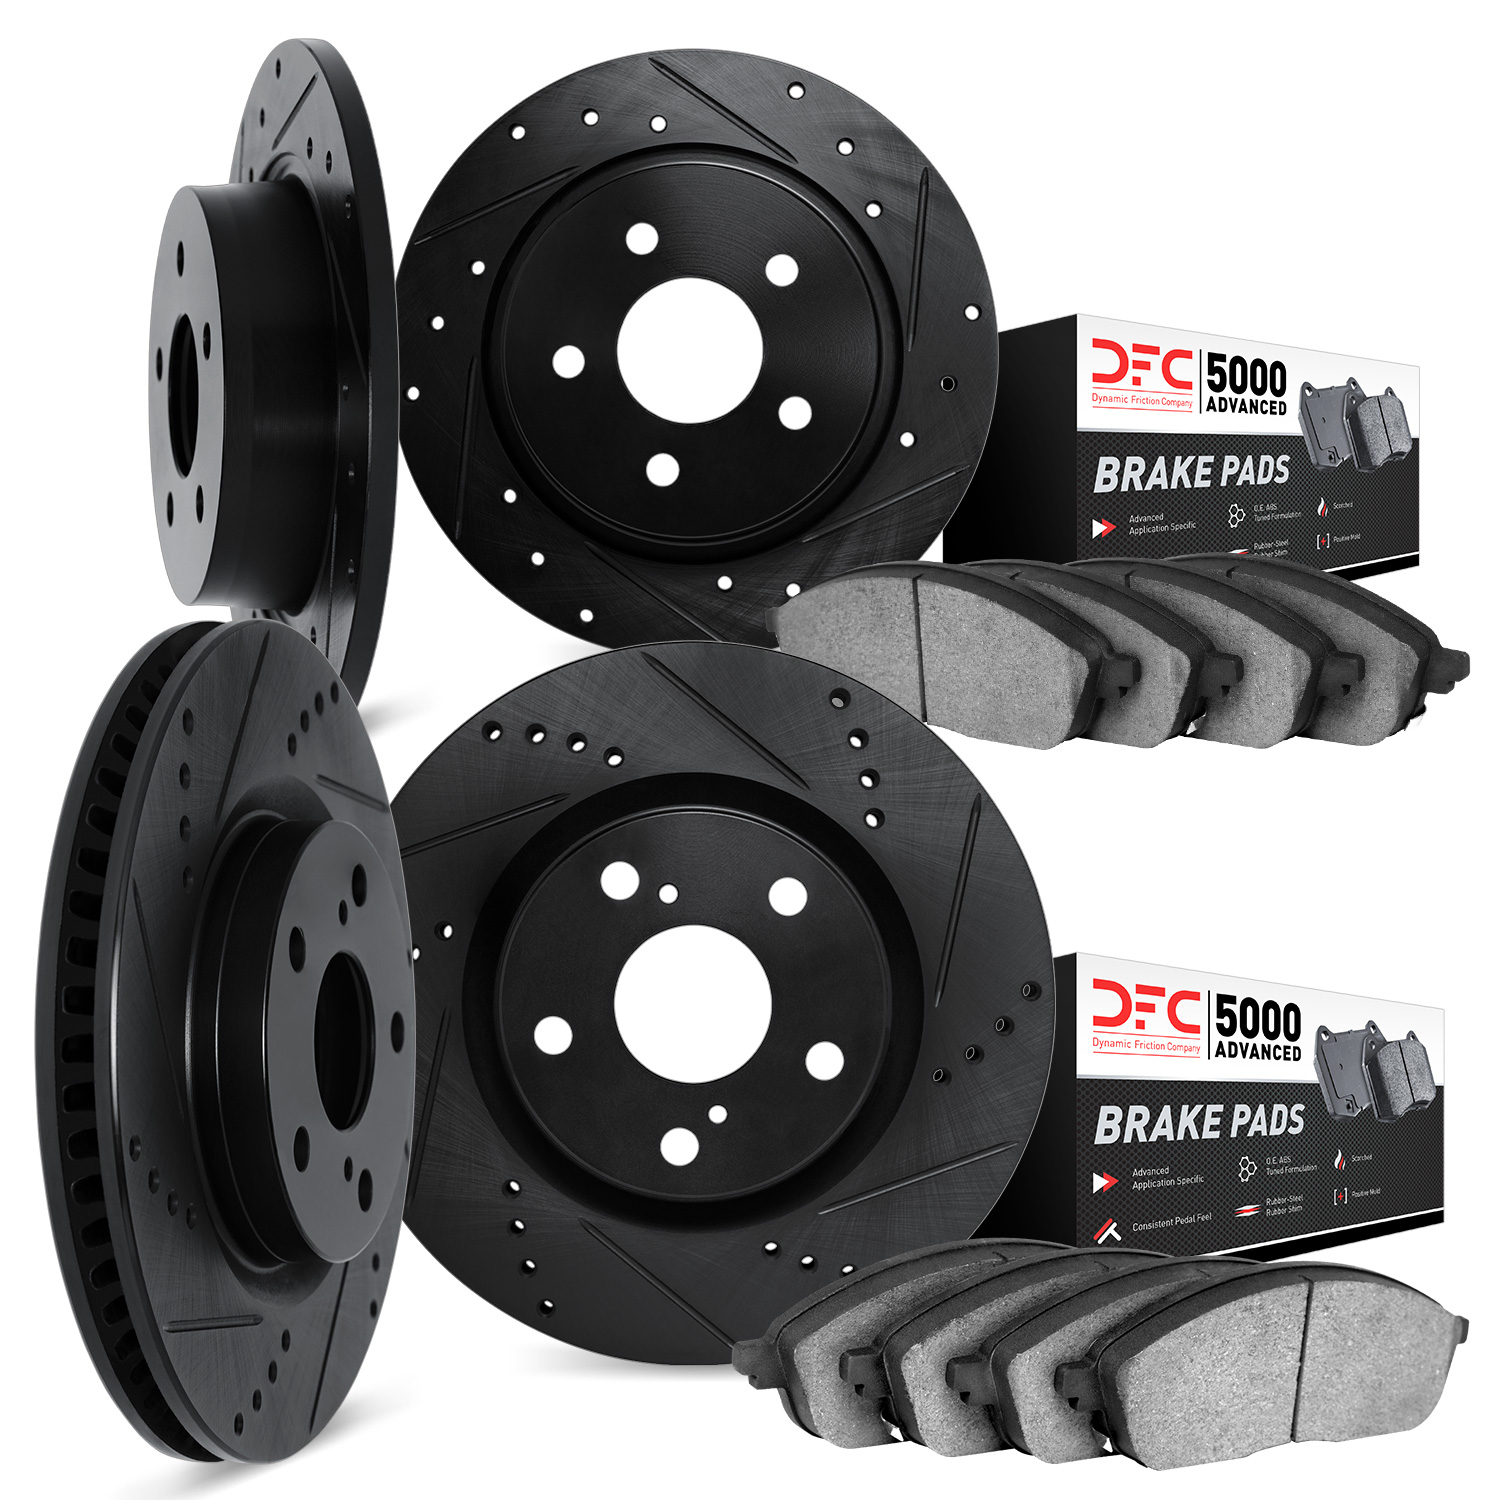 8504-59082 Drilled/Slotted Brake Rotors w/5000 Advanced Brake Pads Kit [Black], 2007-2015 Acura/Honda, Position: Front and Rear